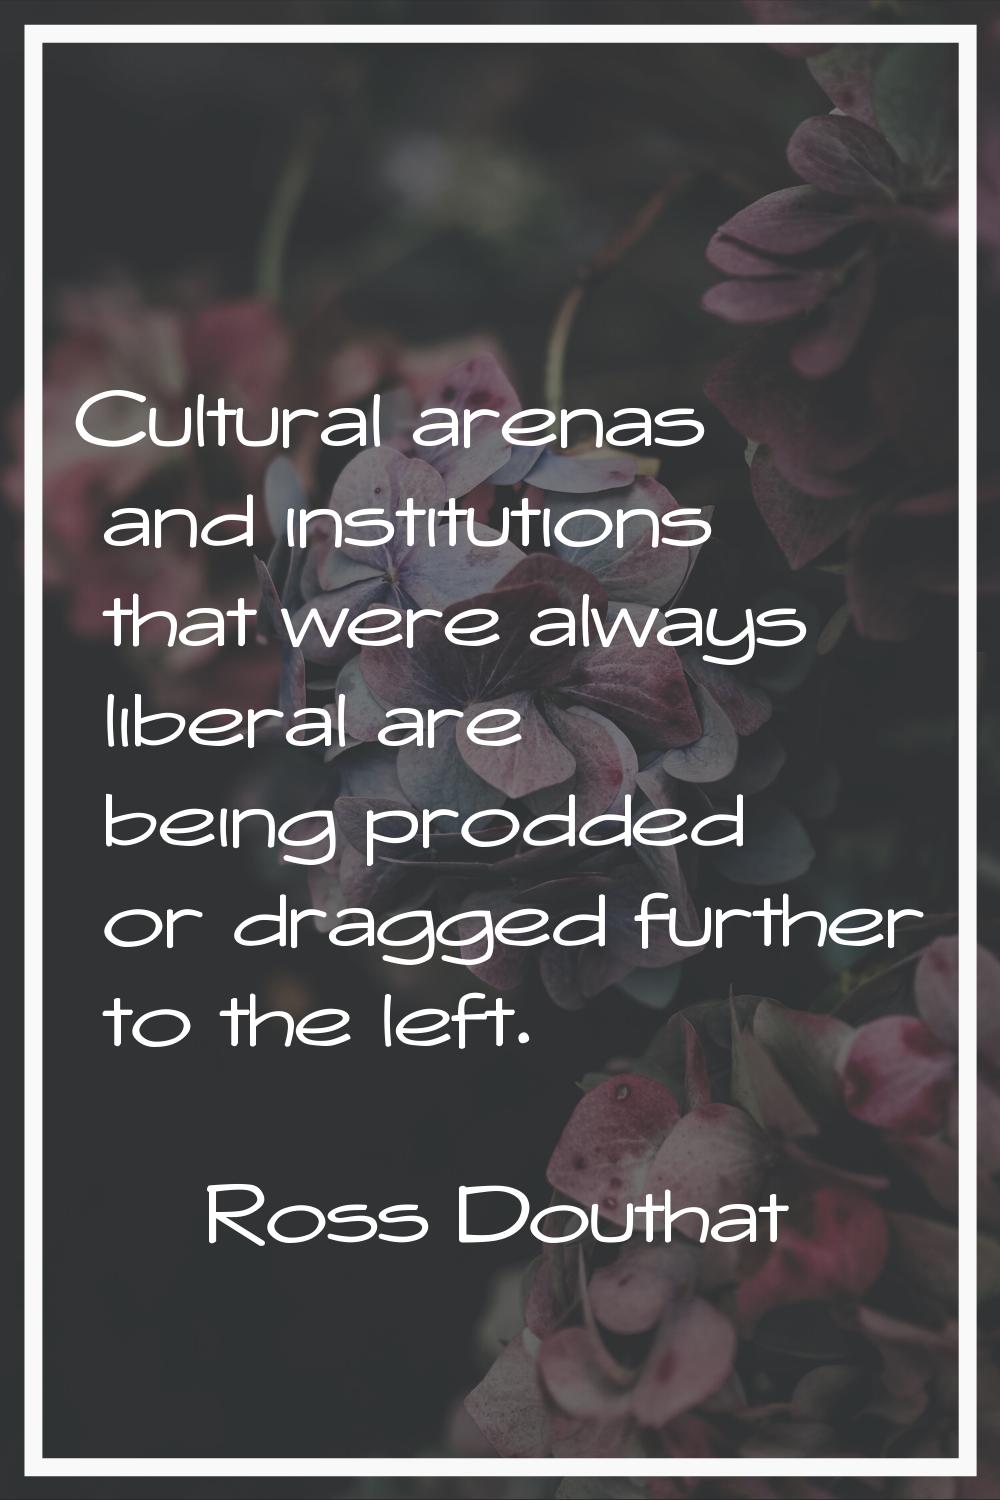 Cultural arenas and institutions that were always liberal are being prodded or dragged further to t